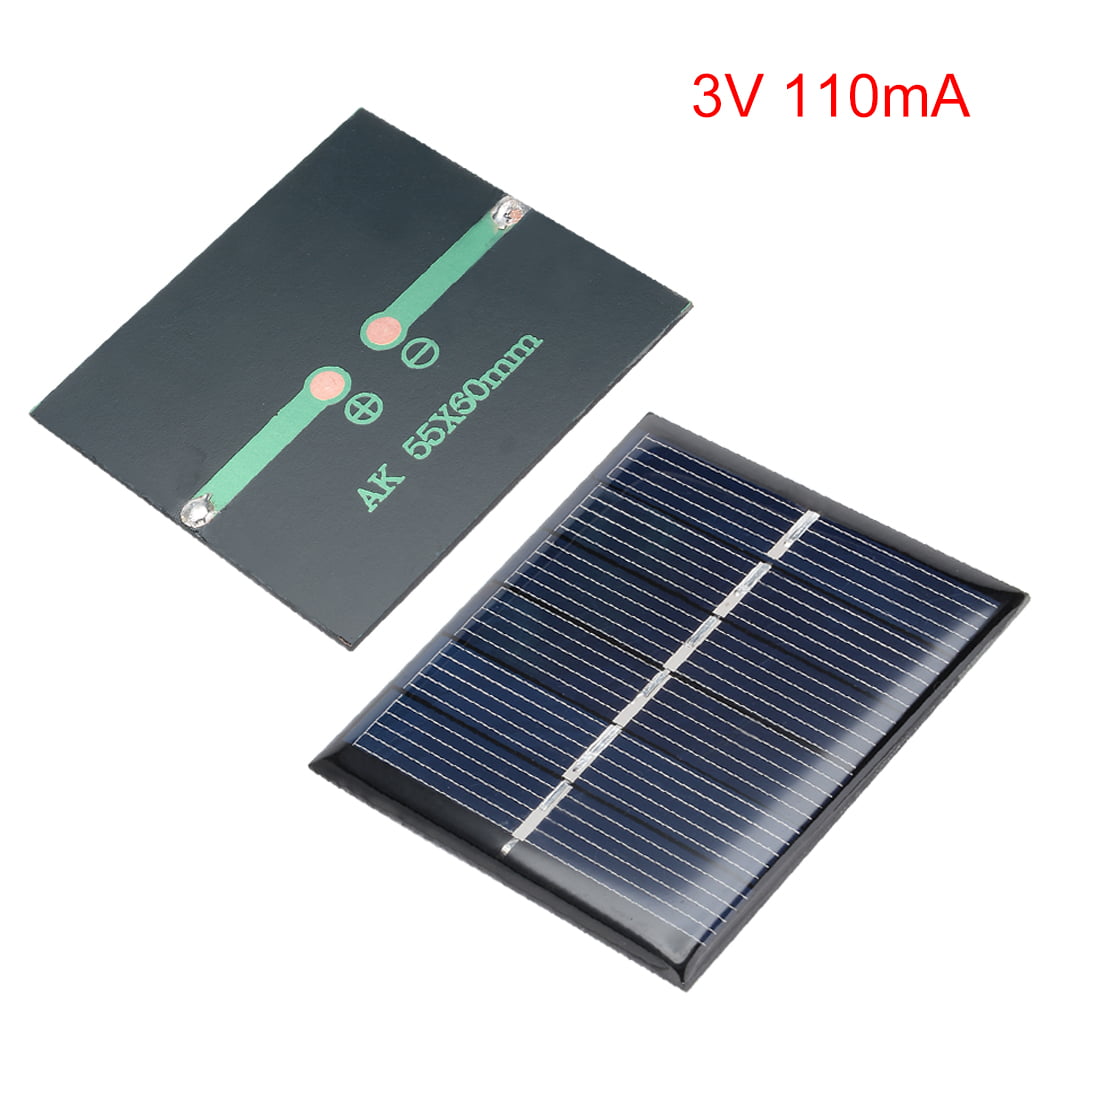 5V 0.2/0.5/1/1.2/1.5W Solar Panel Module for Cell Charger Toy/DIY SC CA 